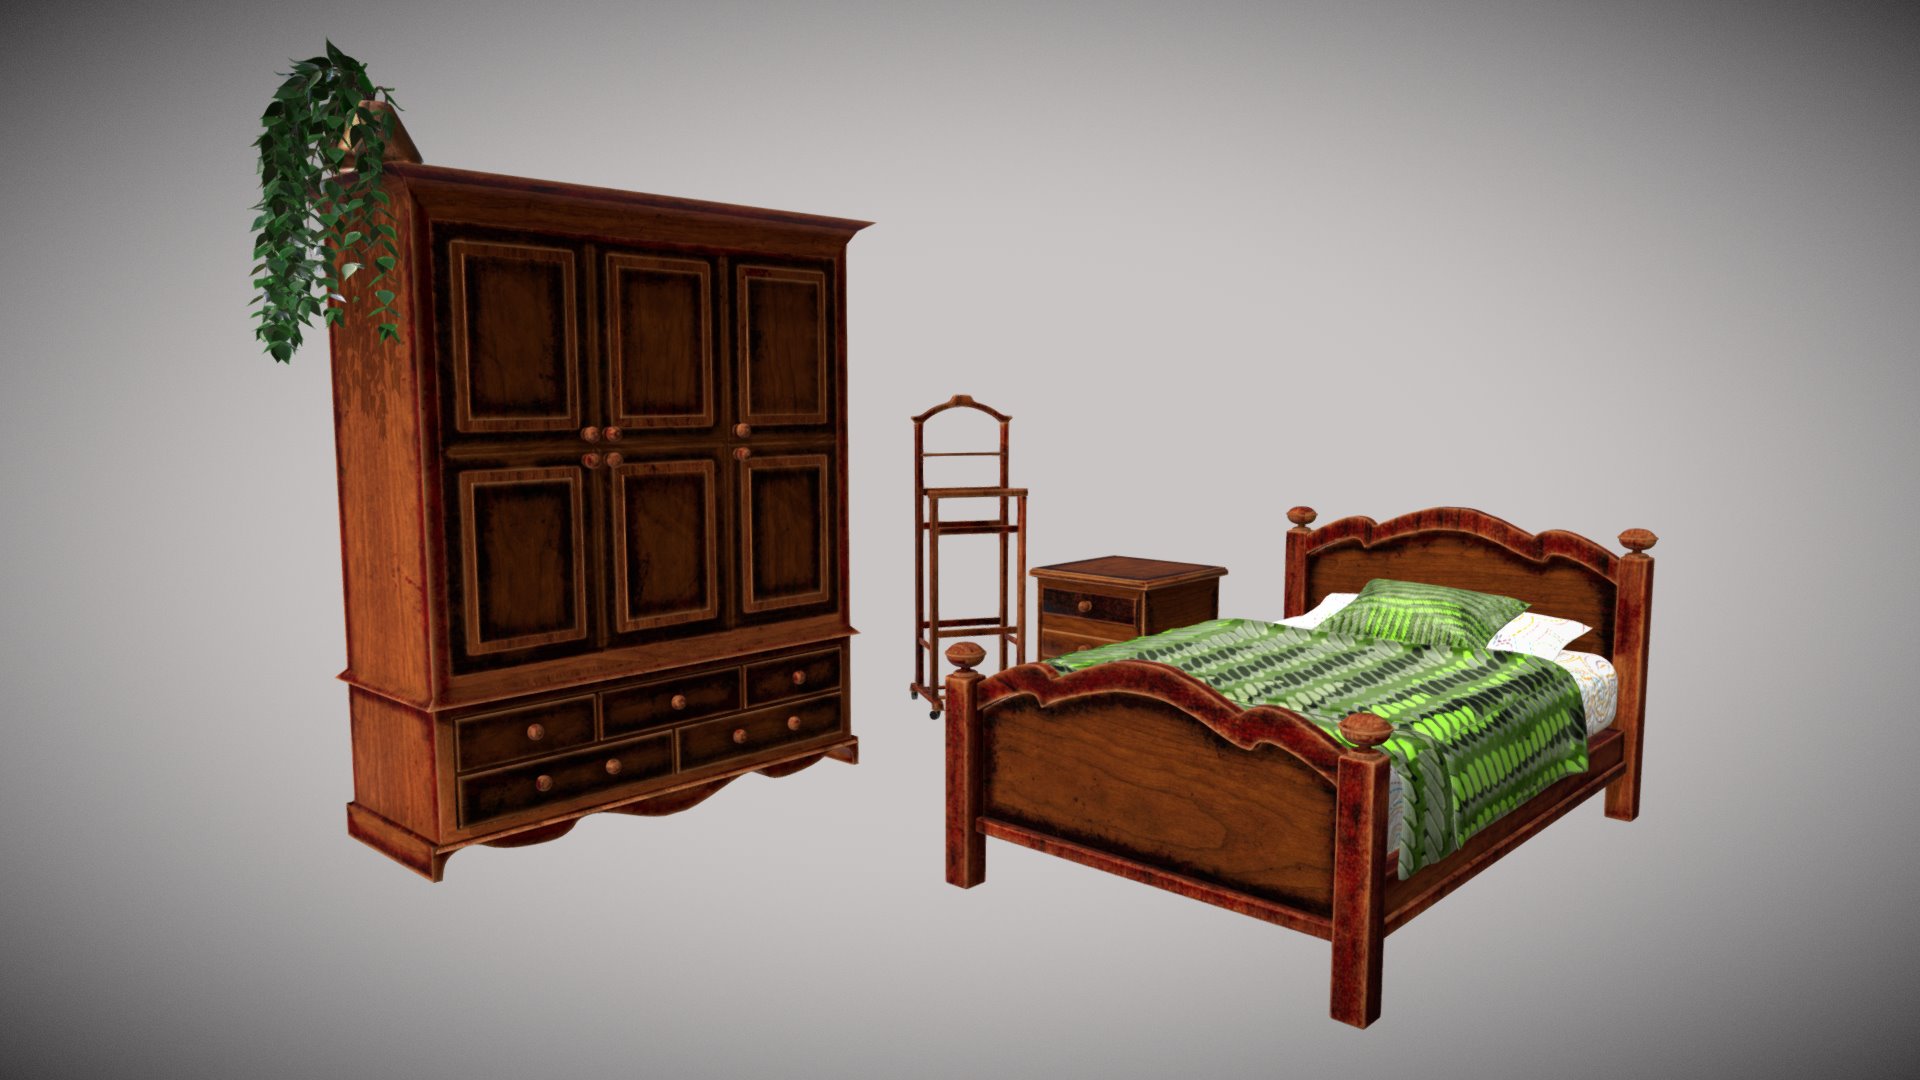 3D model We Set – One Material - This is a 3D model of the We Set - One Material. The 3D model is about a bed and a chair in a room.